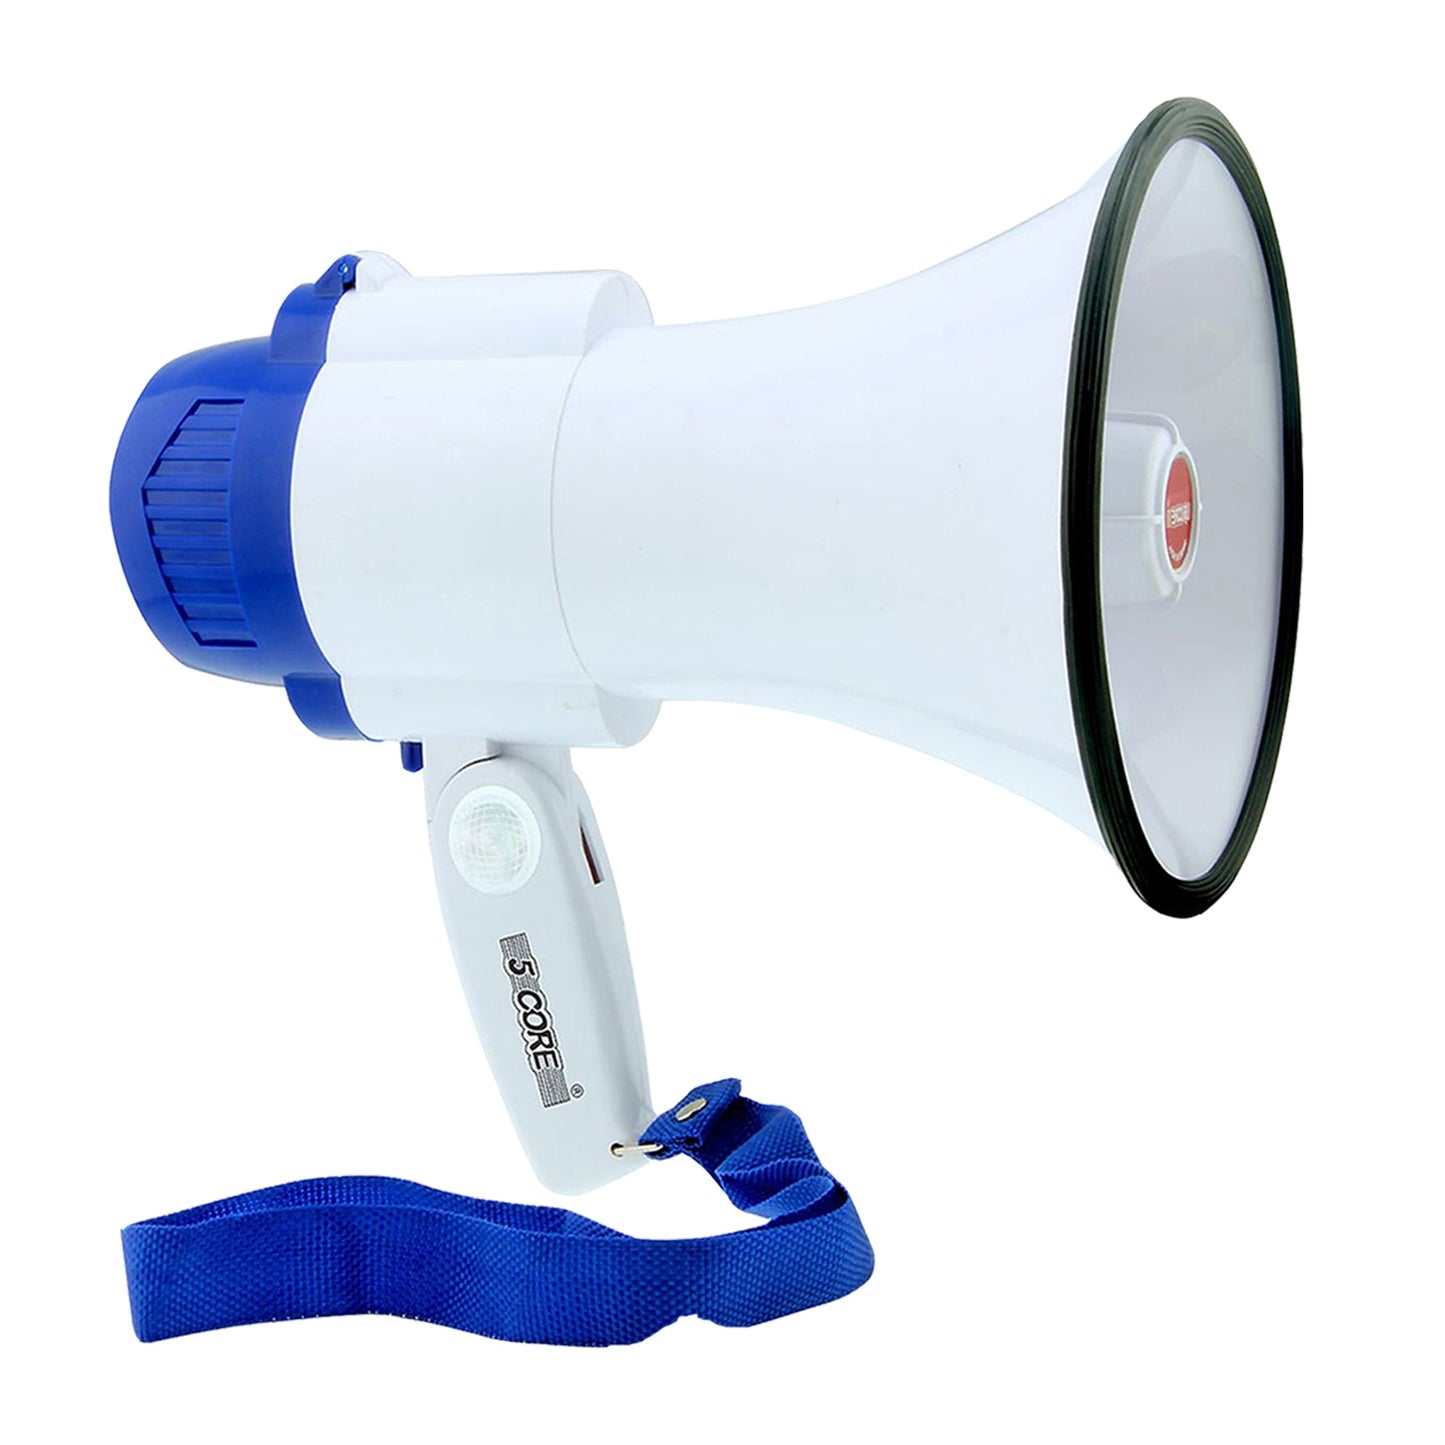 Megaphone 10W Voice Amplifier White-Blue | Cheer Megaphone with USB, SD Card Input| Recording, Volume Control, Siren Alarm| Battery Operated w/ Foldable Handle, Holding Strap- 8R-USB WOB